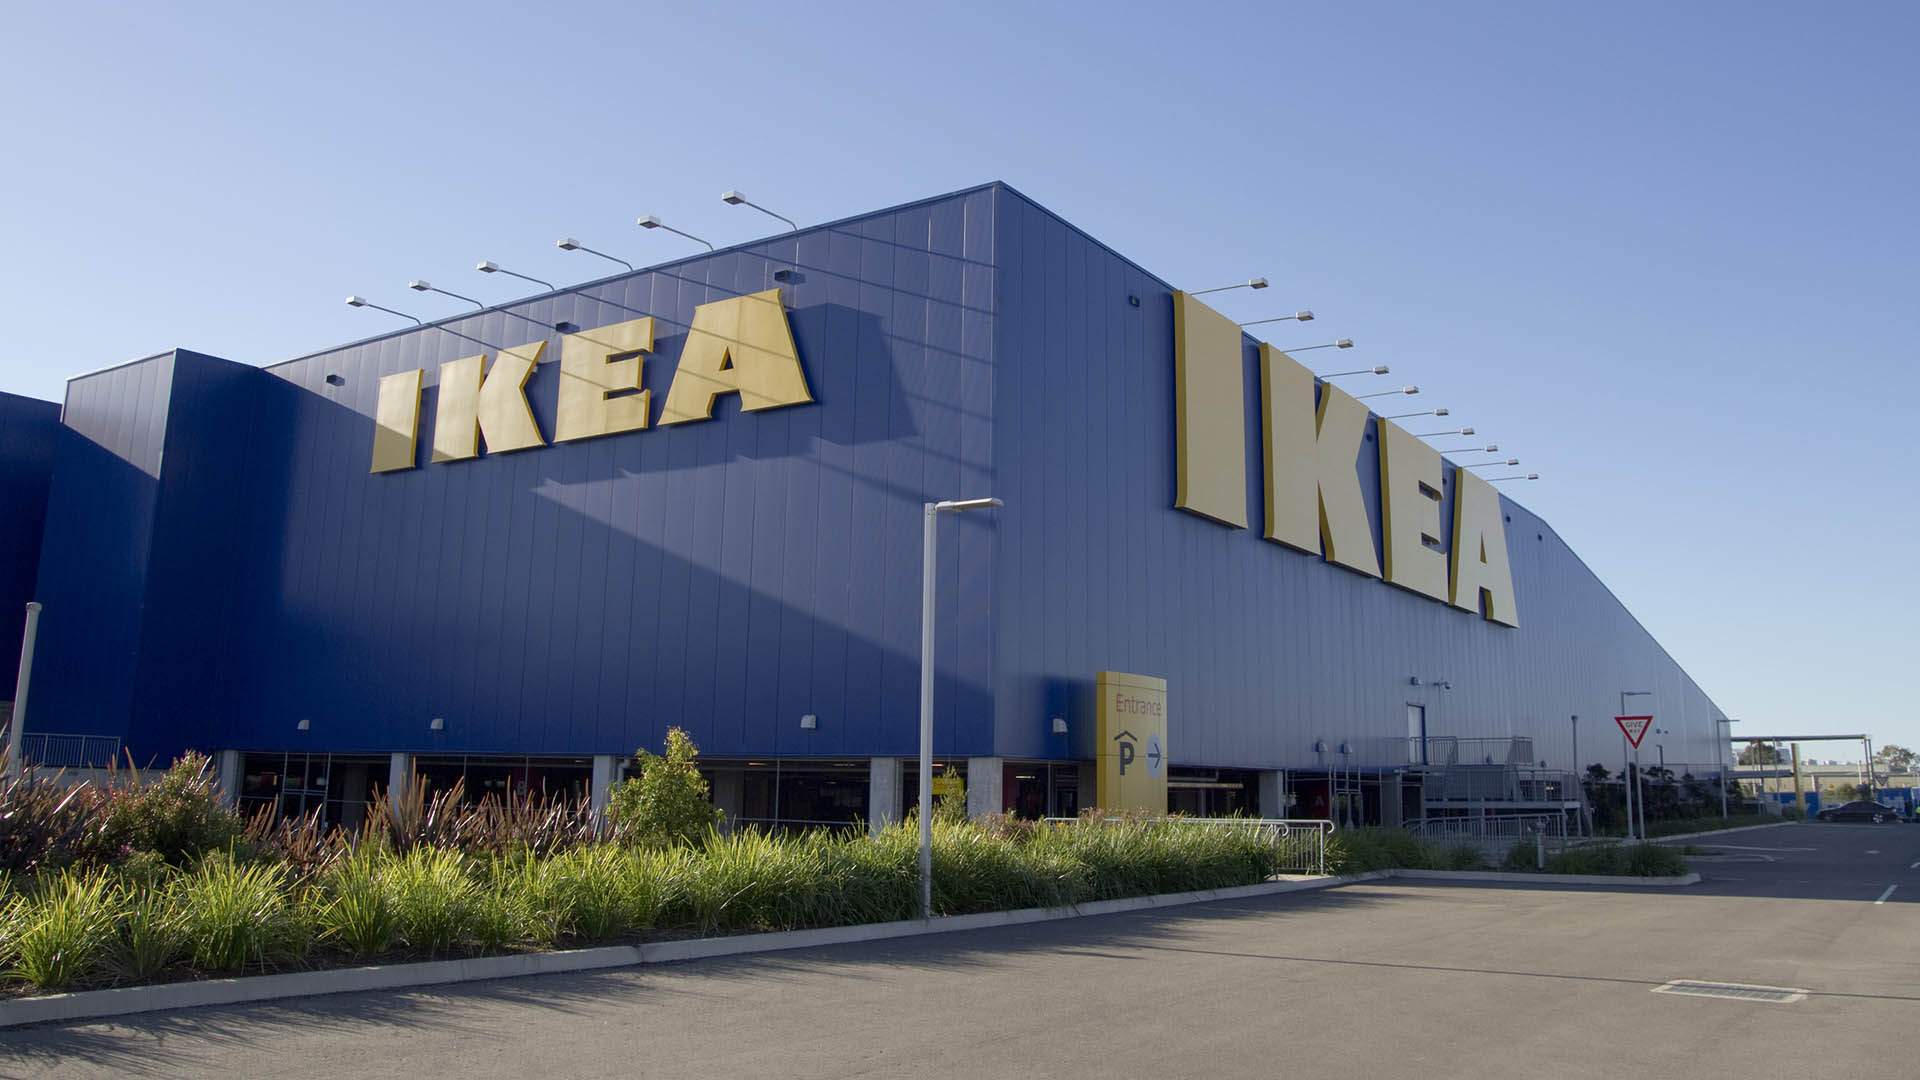 IKEA Tempe and Central Station Have Joined NSW's 106-Venue List of Exposure Sites